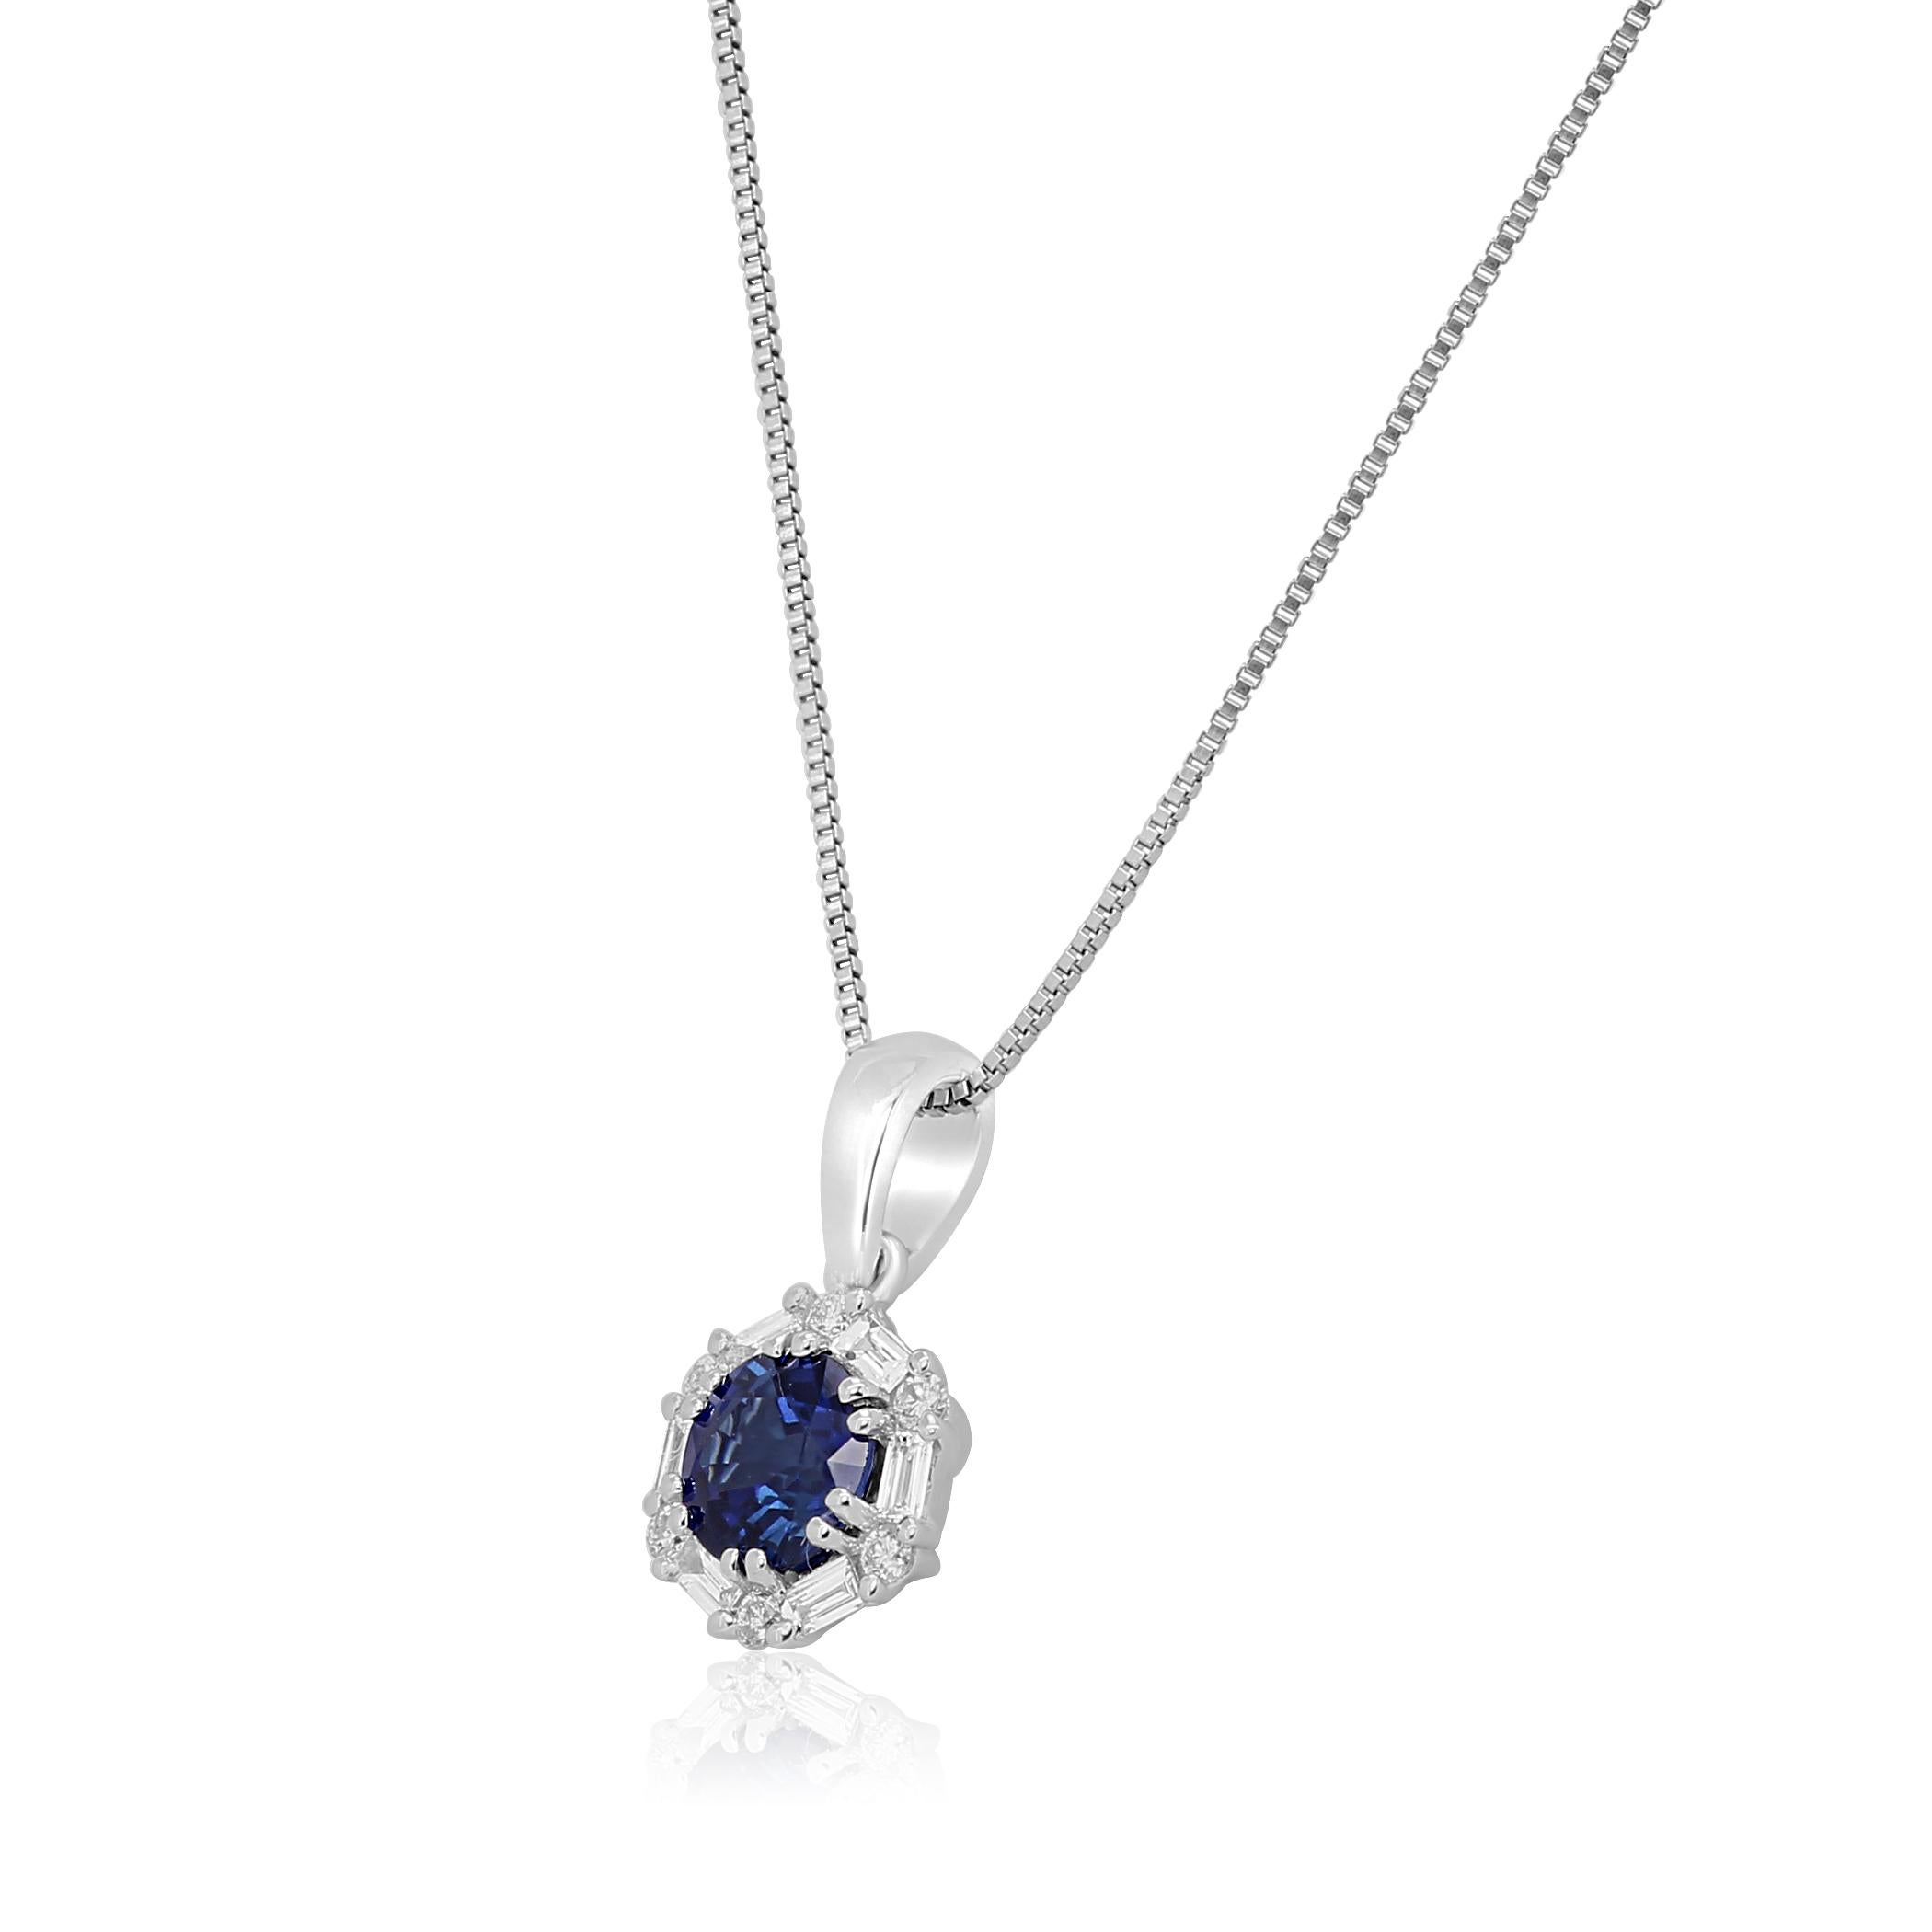 Blue Sapphire Round 0.77 Carat Encircled in a Halo of White Diamond Baguettes 0.13 Carat and White Diamond Round 0.07 Carat in 14K White Gold Must Have Every Day Wear Pendant Chain Necklace. 

Style available in different price ranges. Prices are